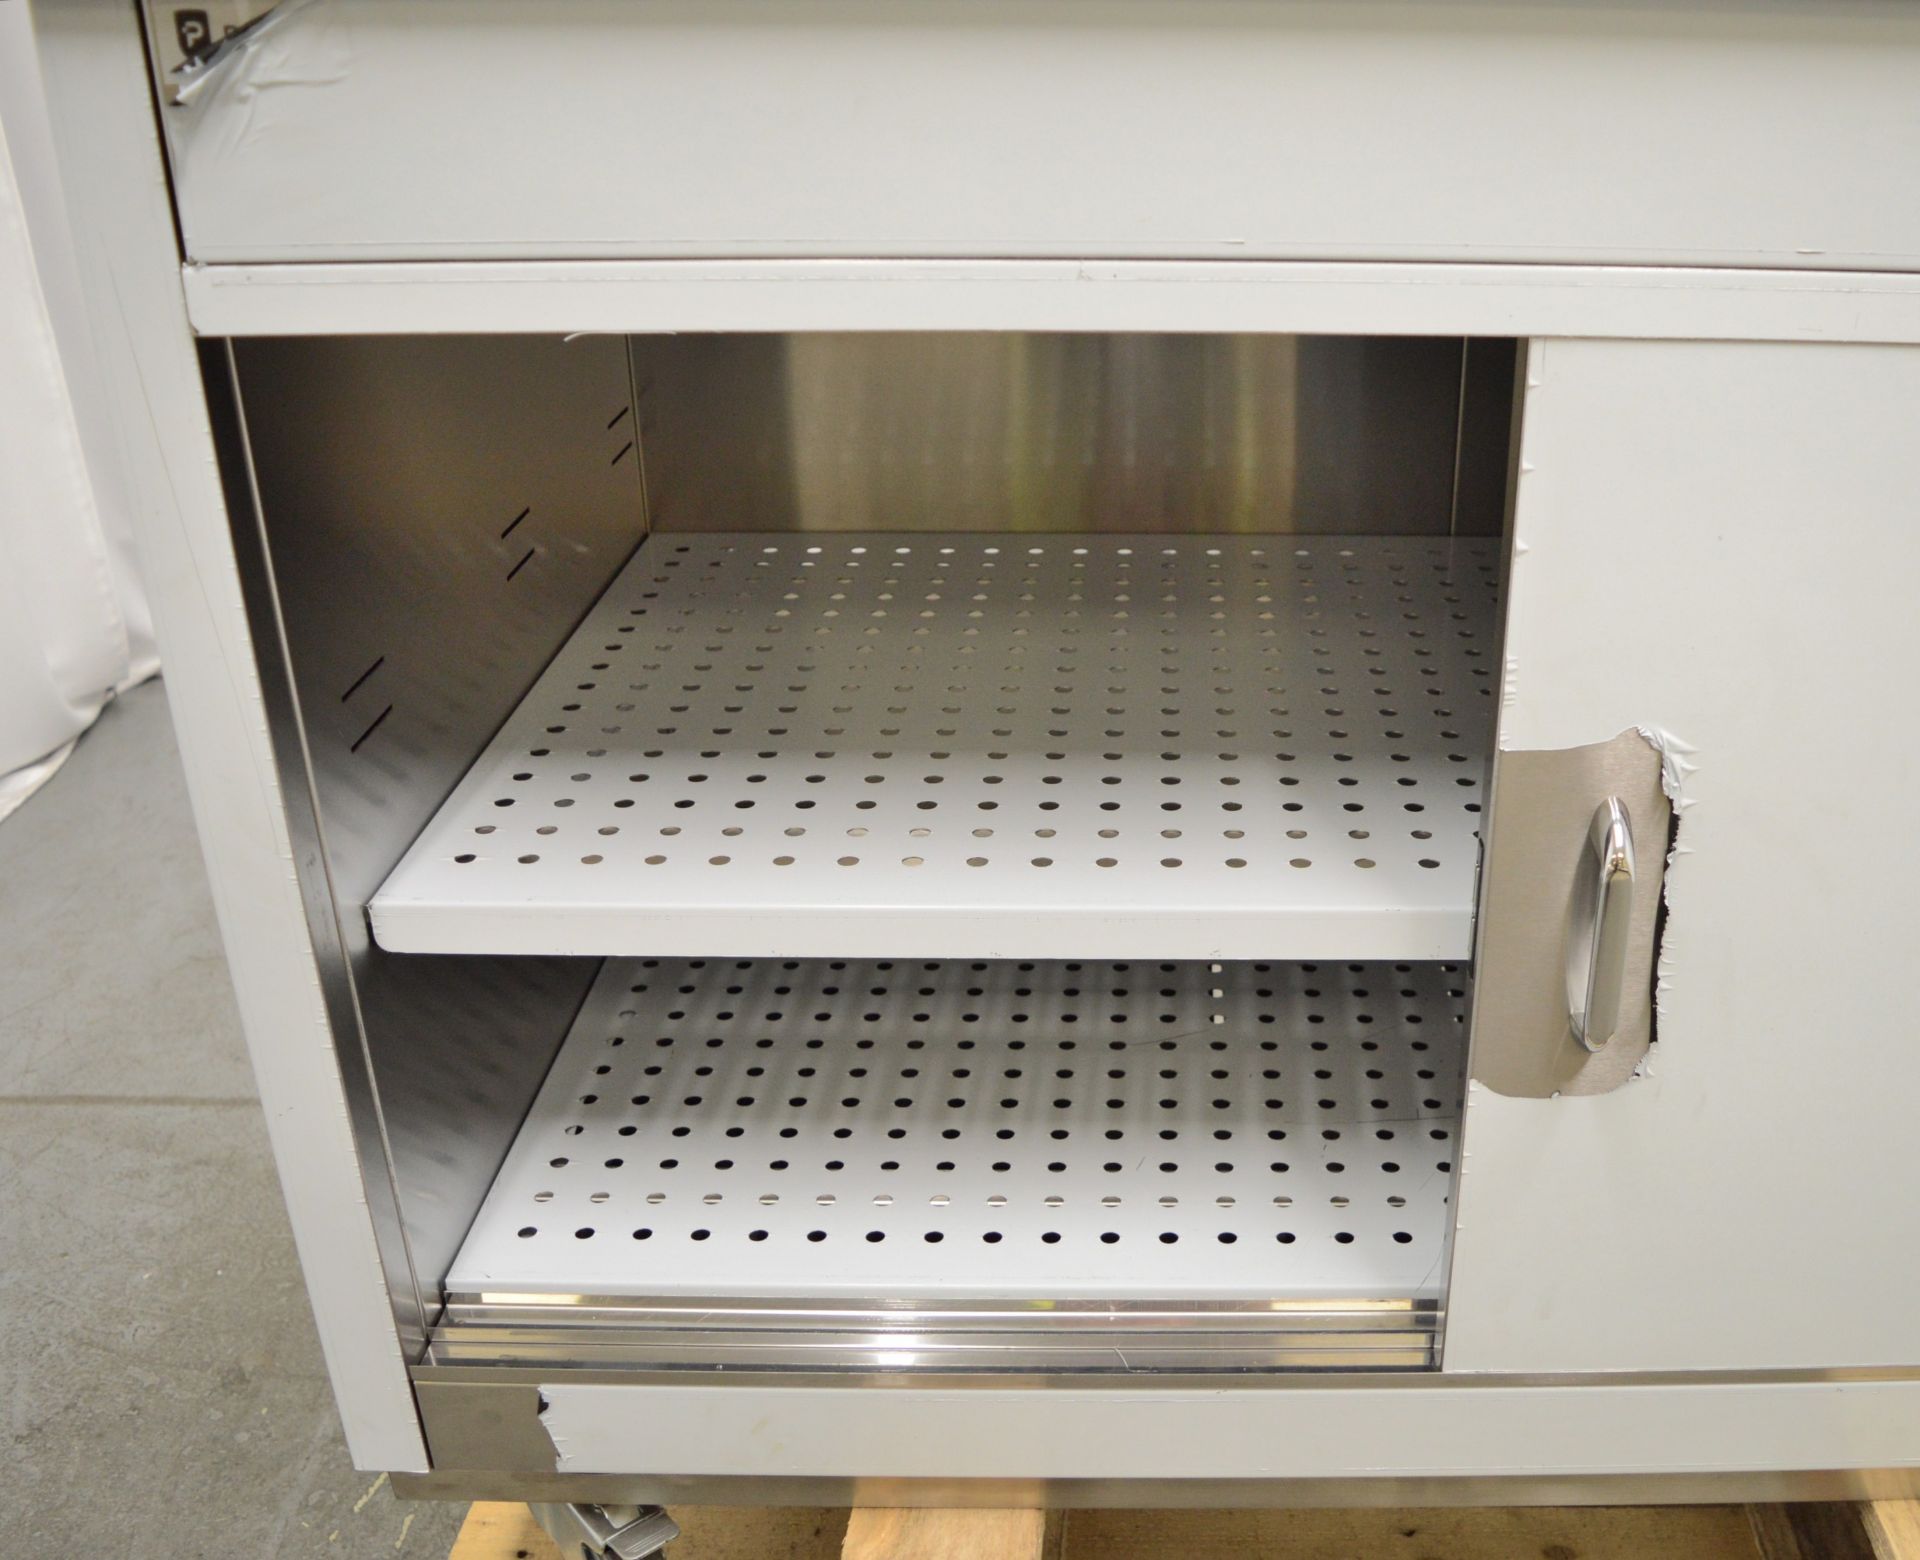 Parry HOT12 stainless steel hot cupboard, 1200x650x900mm(LxDxH) 230v - Image 2 of 7